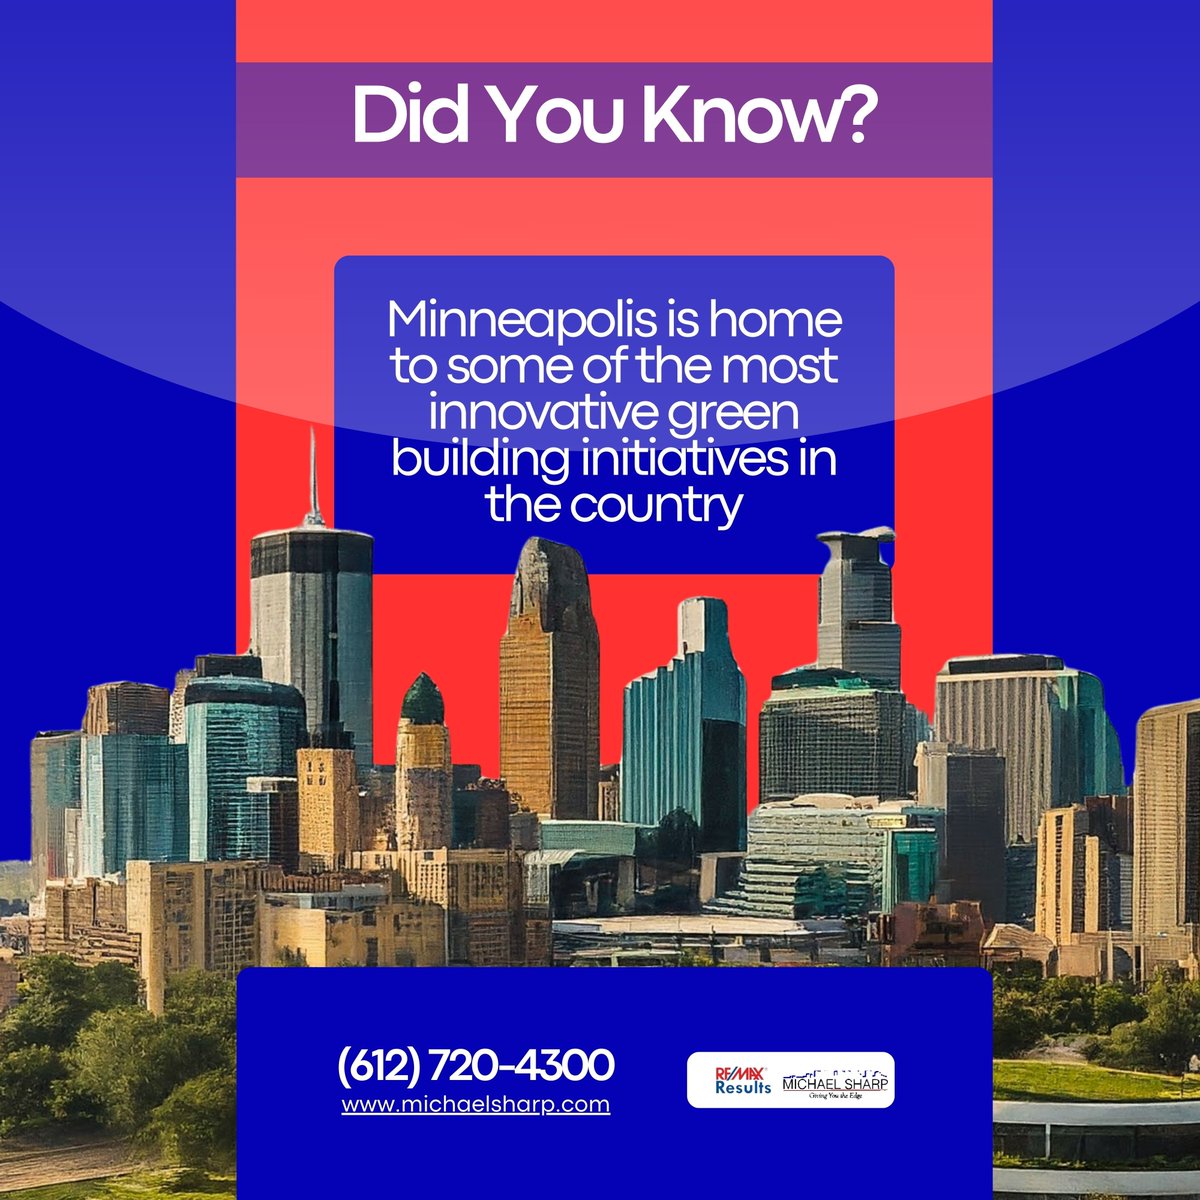 Minneapolis leads with green! 

Did you know we're at the forefront of eco-friendly building initiatives? 🌱🏢 

#EcoFriendly #SustainableLiving #GreenBuildings #MinneapolisInnovation #EnvironmentalCare #FutureForward #EcoDesign #GreenInitiatives #CitySustainability #DidYouKnow